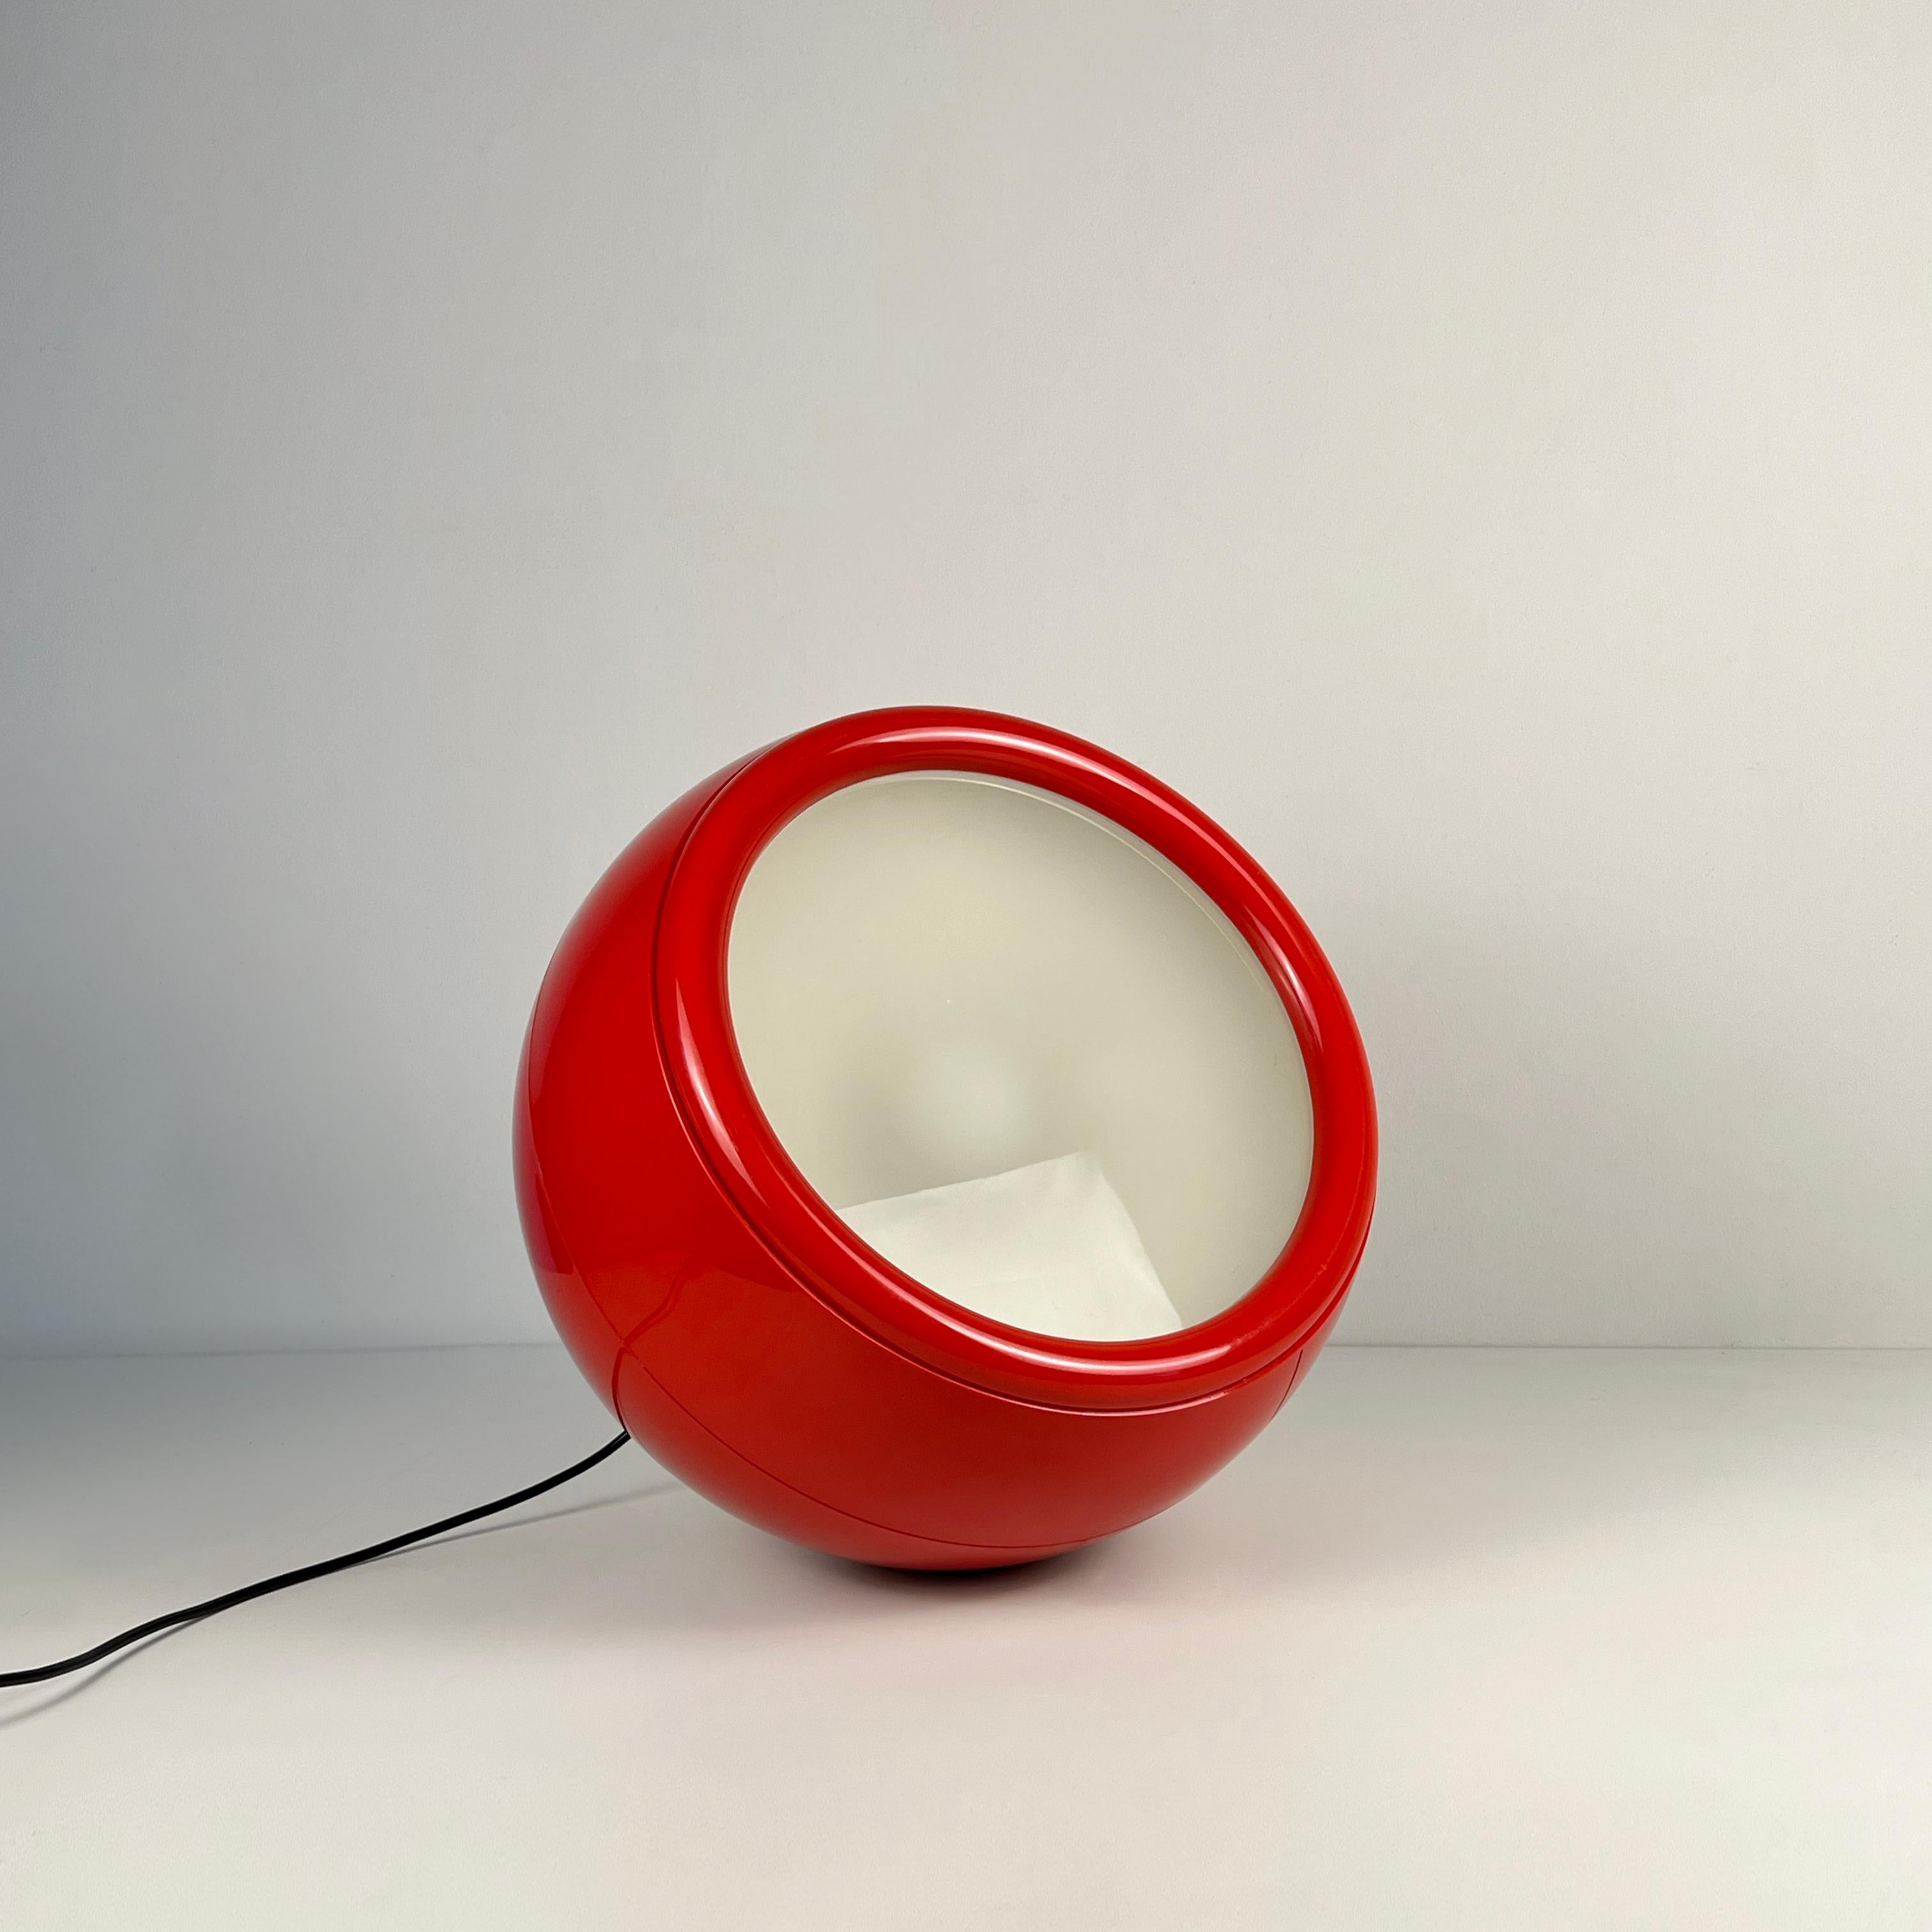 Red Pallade (1st Ed. 1968) floor lamp designed by Studio Tetrarch for Artemide For Sale 6